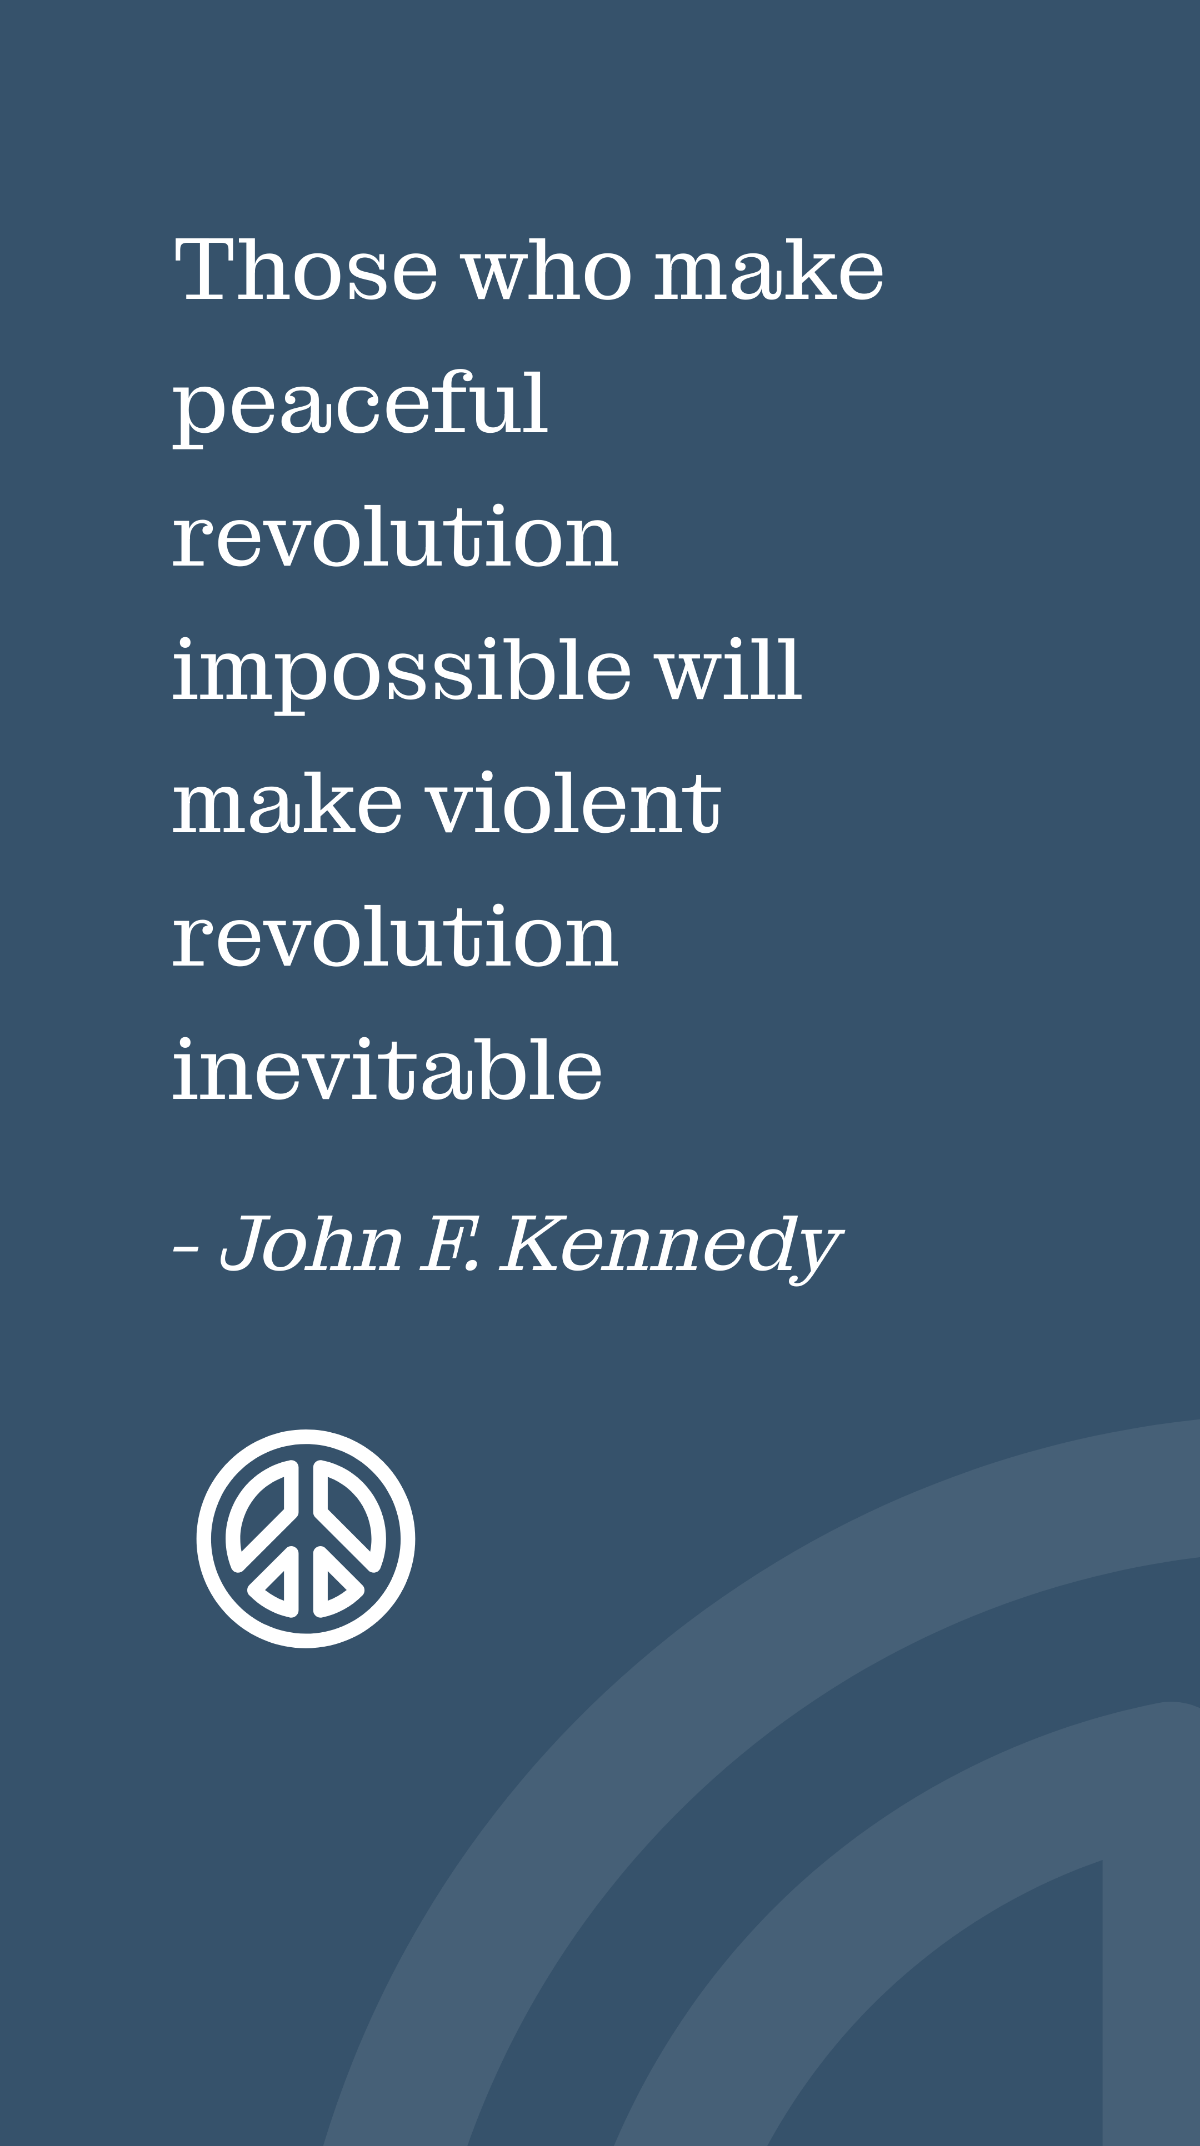 John F. Kennedy - Those who make peaceful revolution impossible will make violent revolution inevitable Template